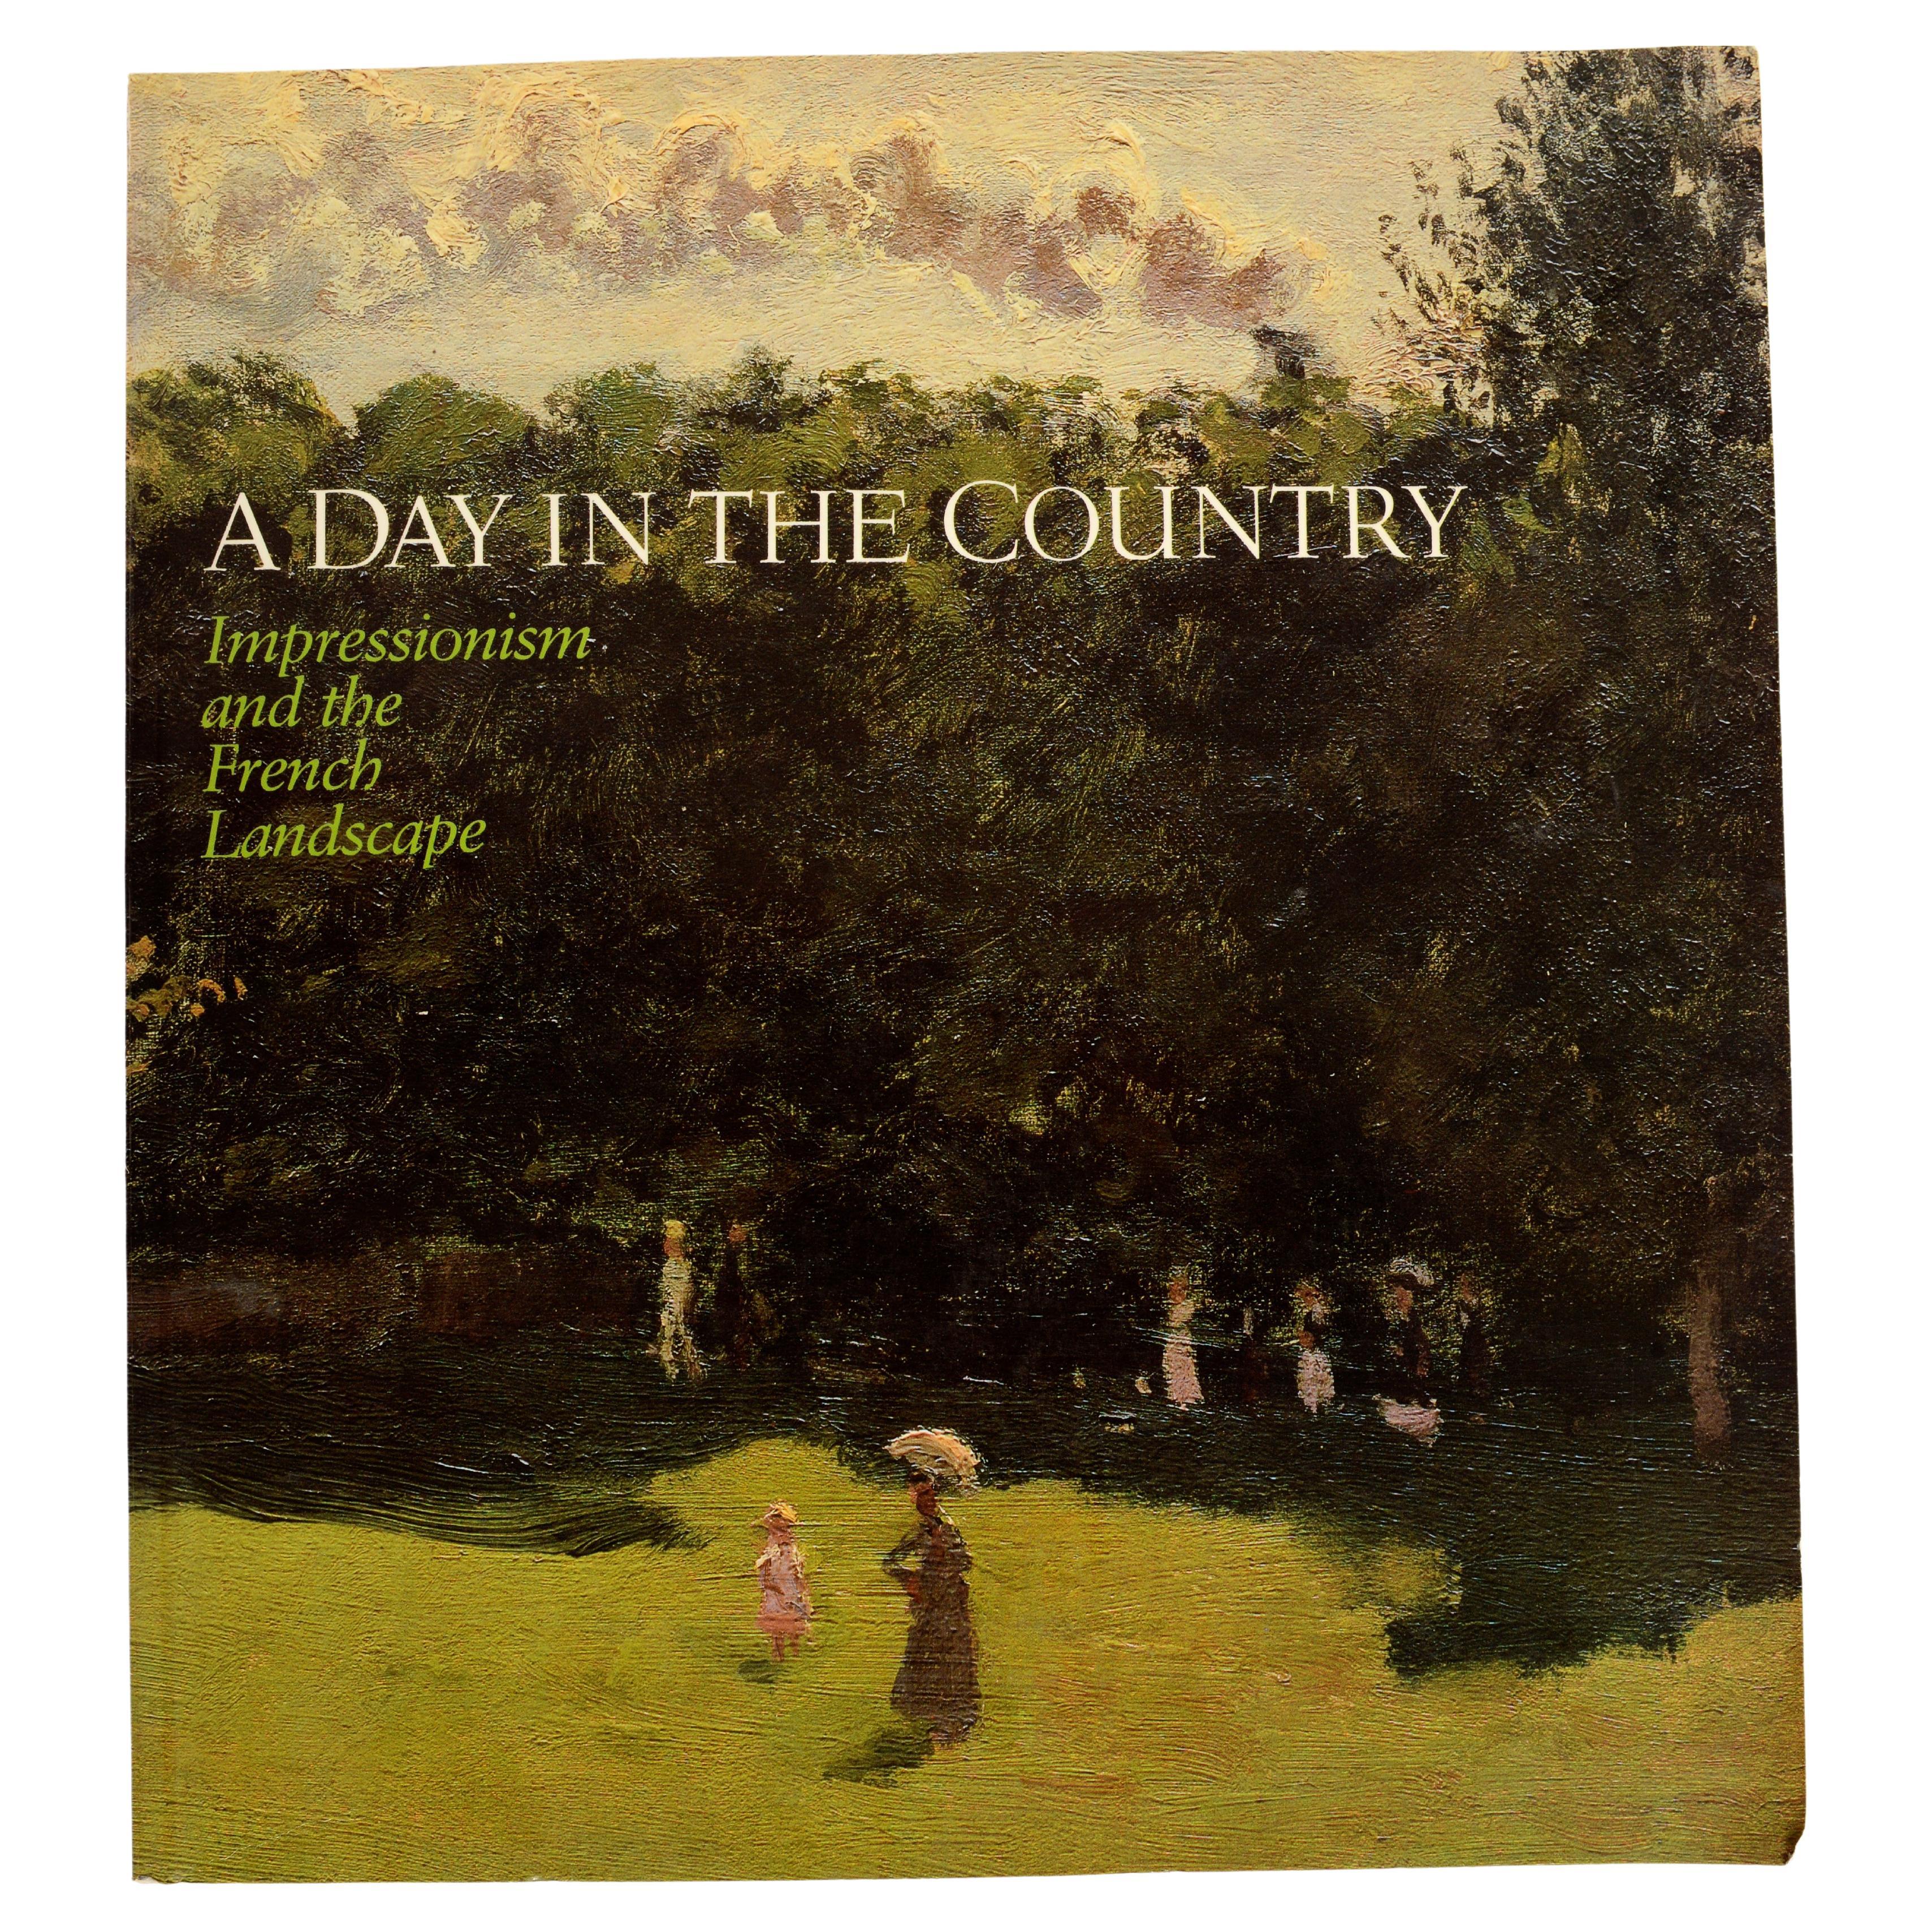 Day in the Country Impression and French Landscape, Exhibition Catalog, 1st Ed